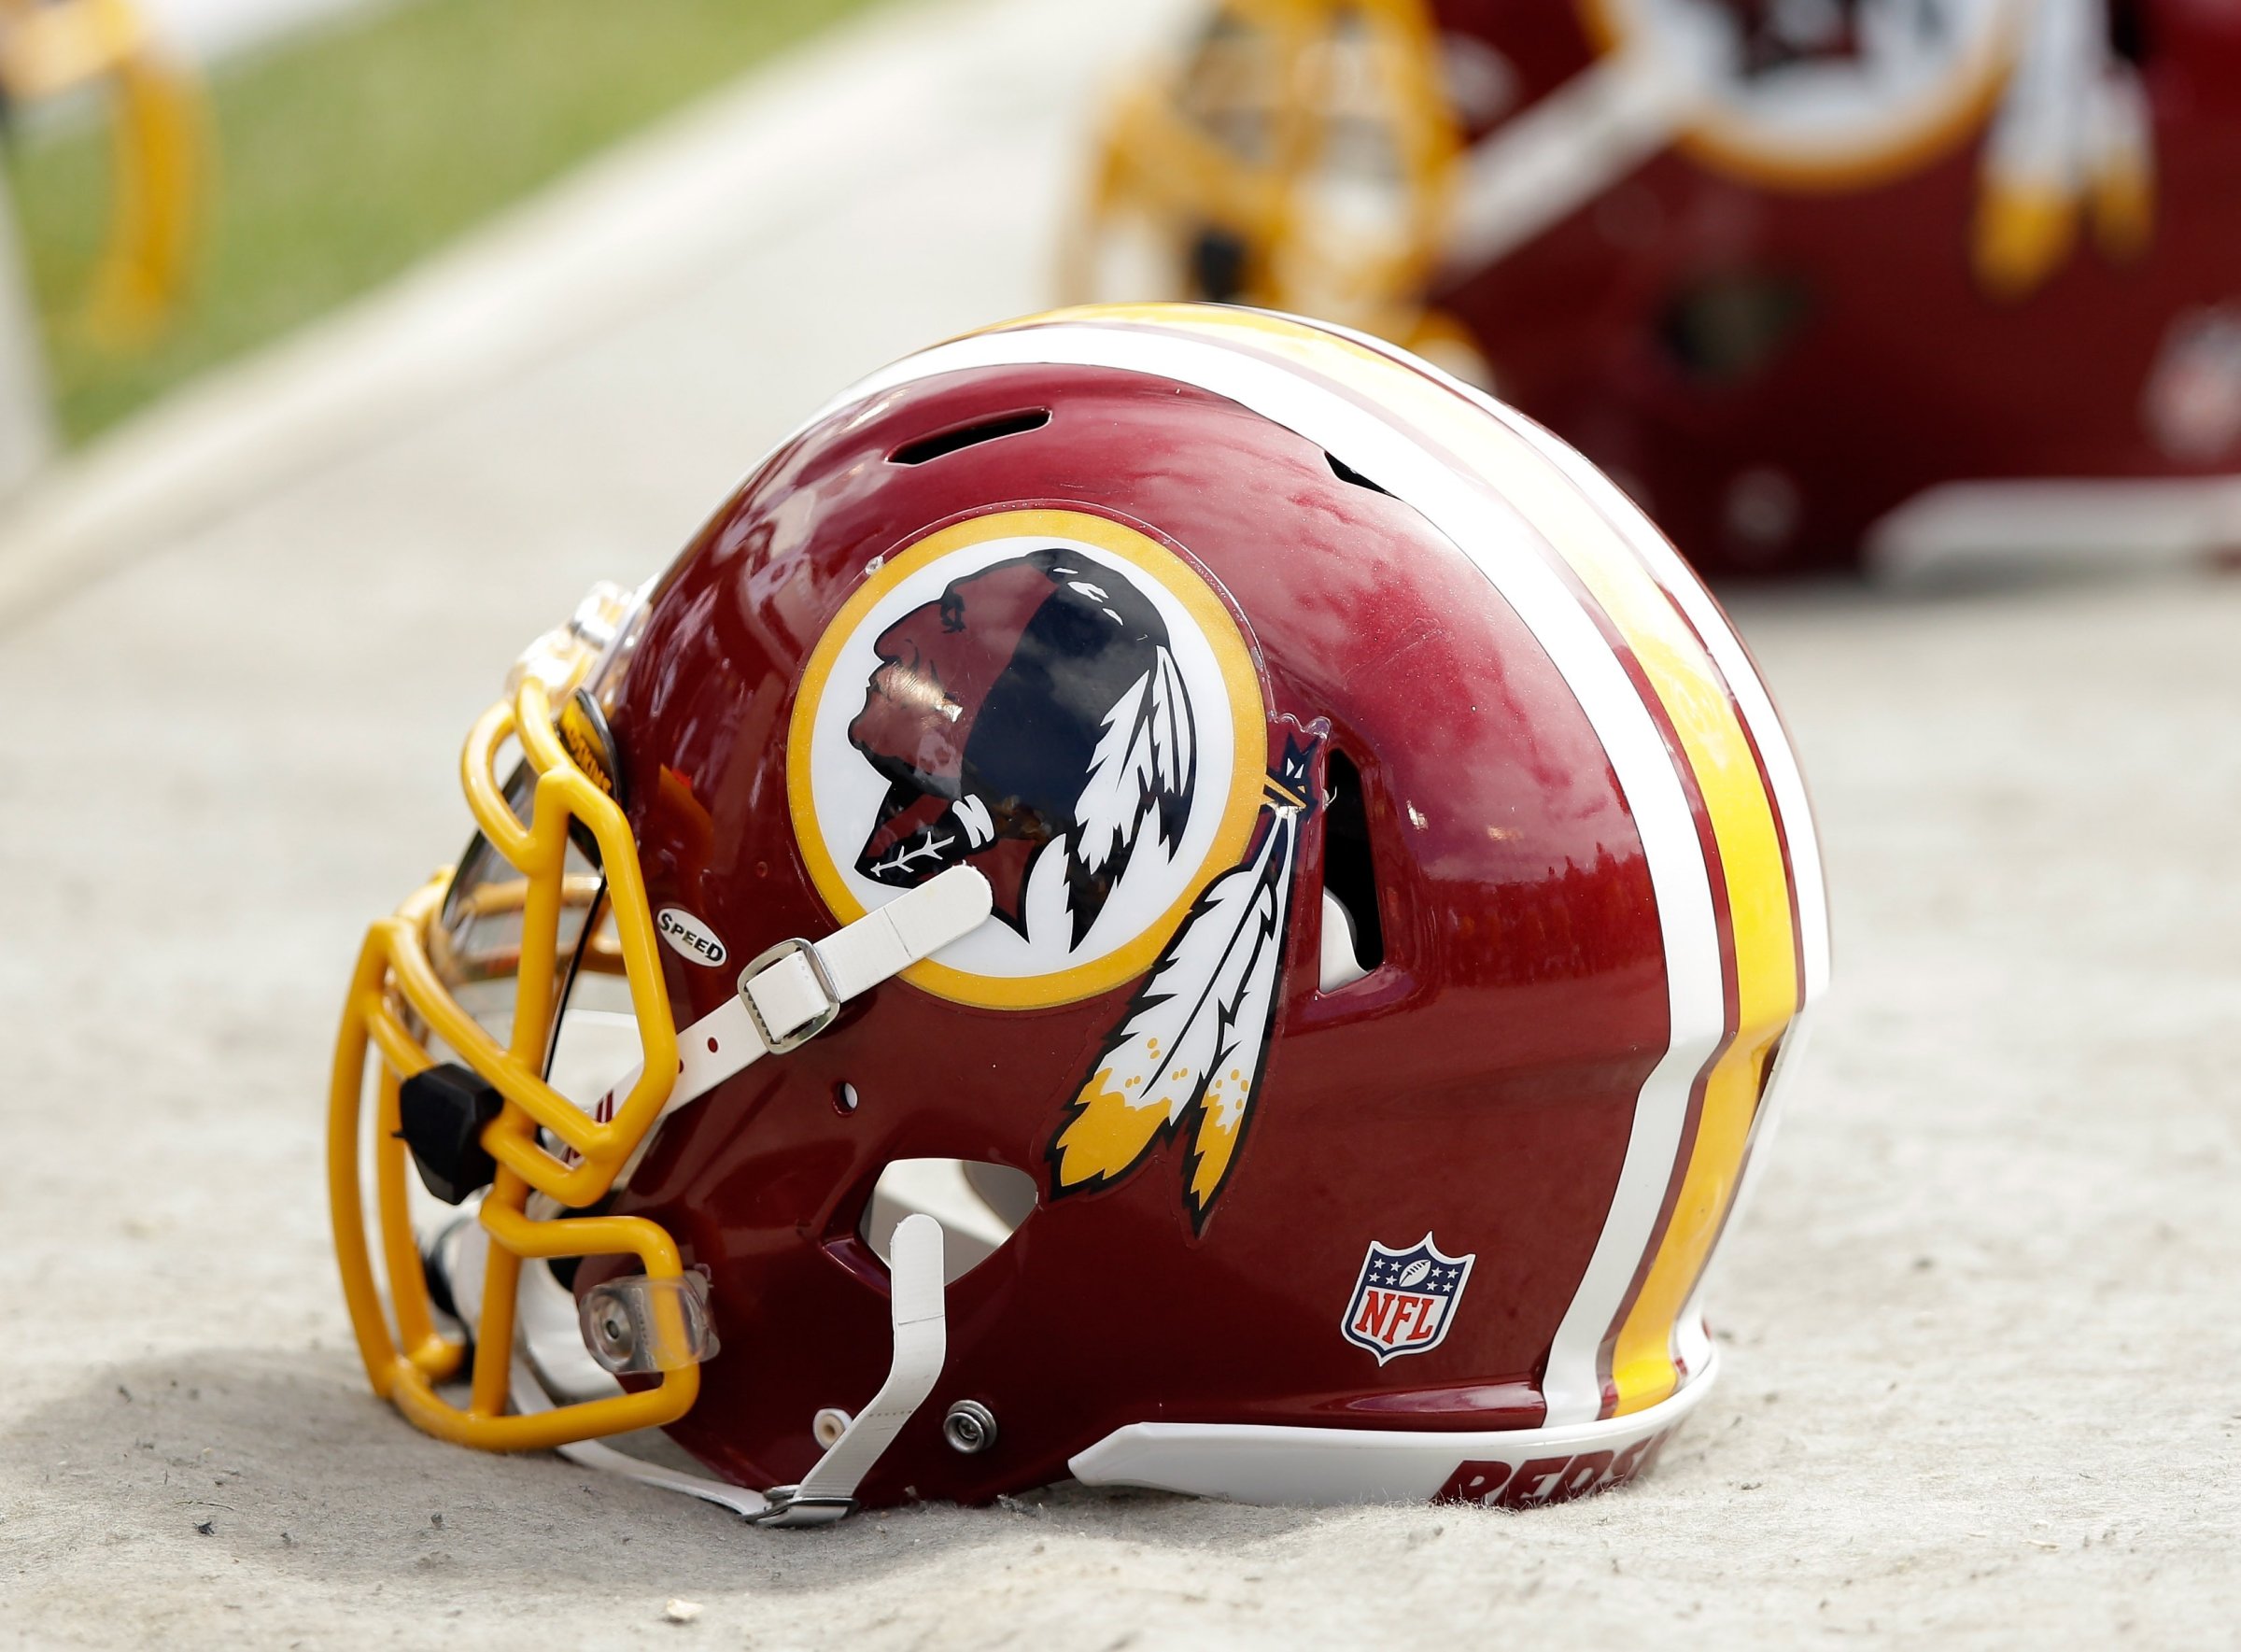 Washington Redskins helmets lay on the ground during a game against the Oakland Raiders